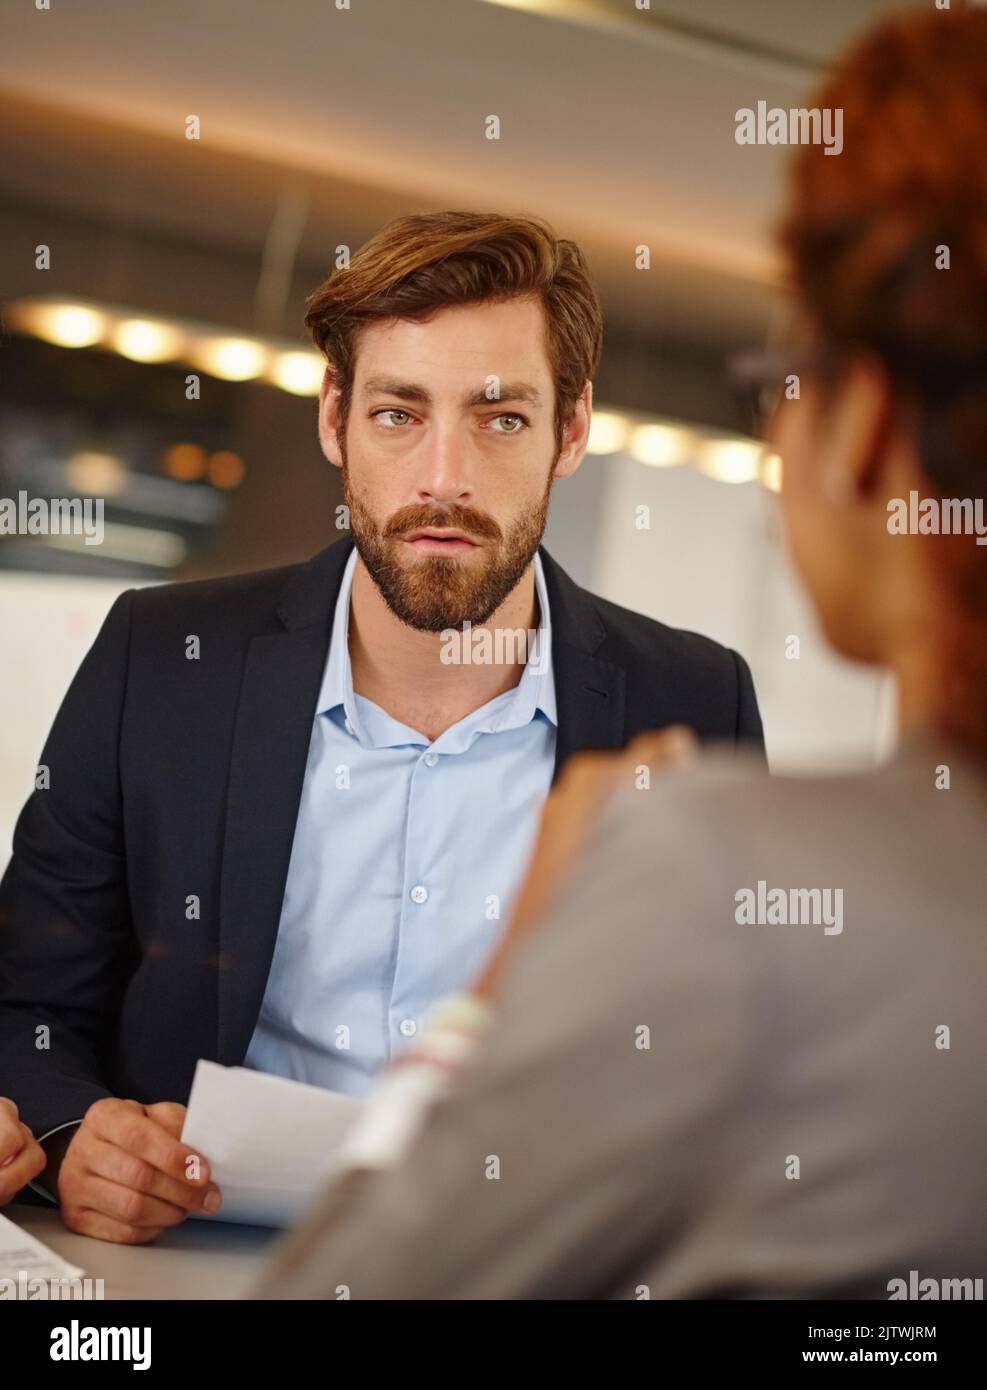 Weve got some serious matters to discuss. a businessman having a face to face meeting with a colleague at work. Stock Photo